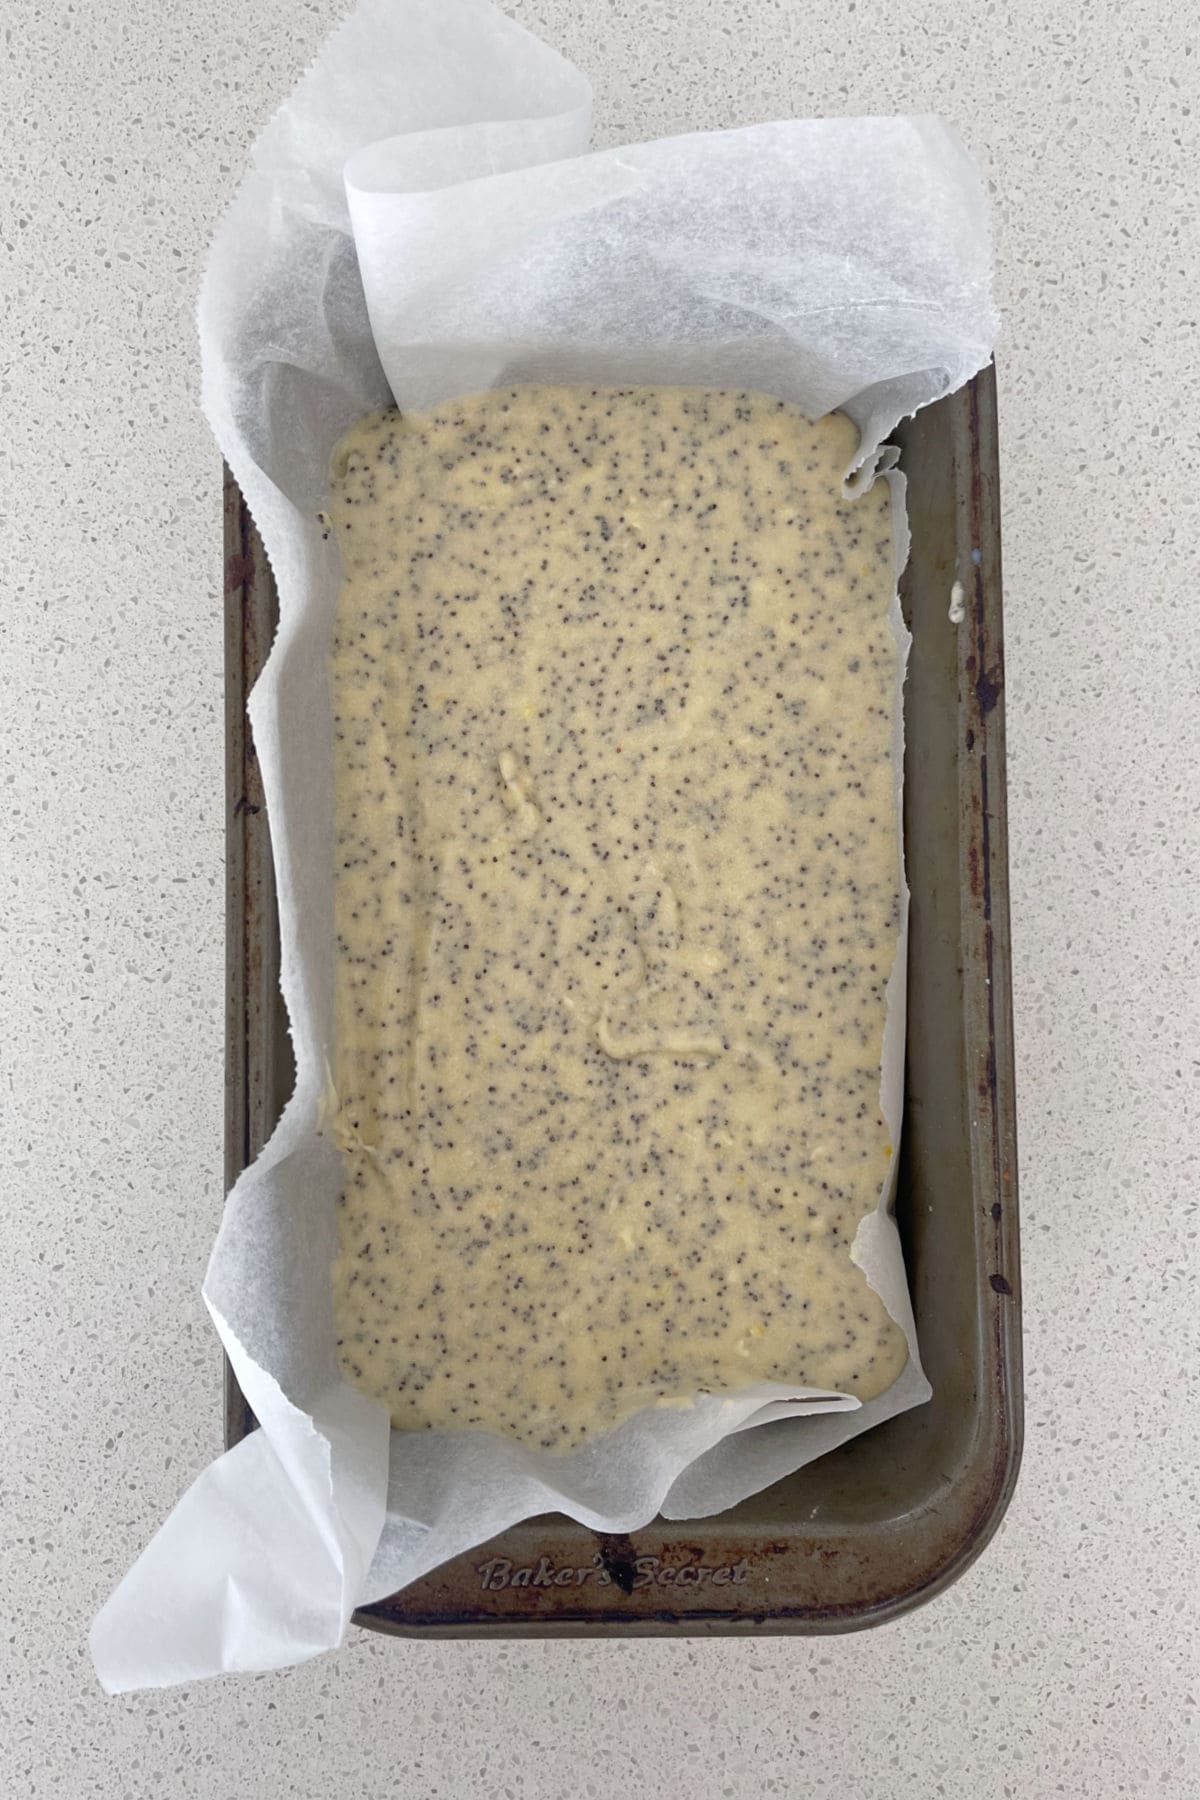 Lemon and Poppy Seed cake mixture in a baking dish.